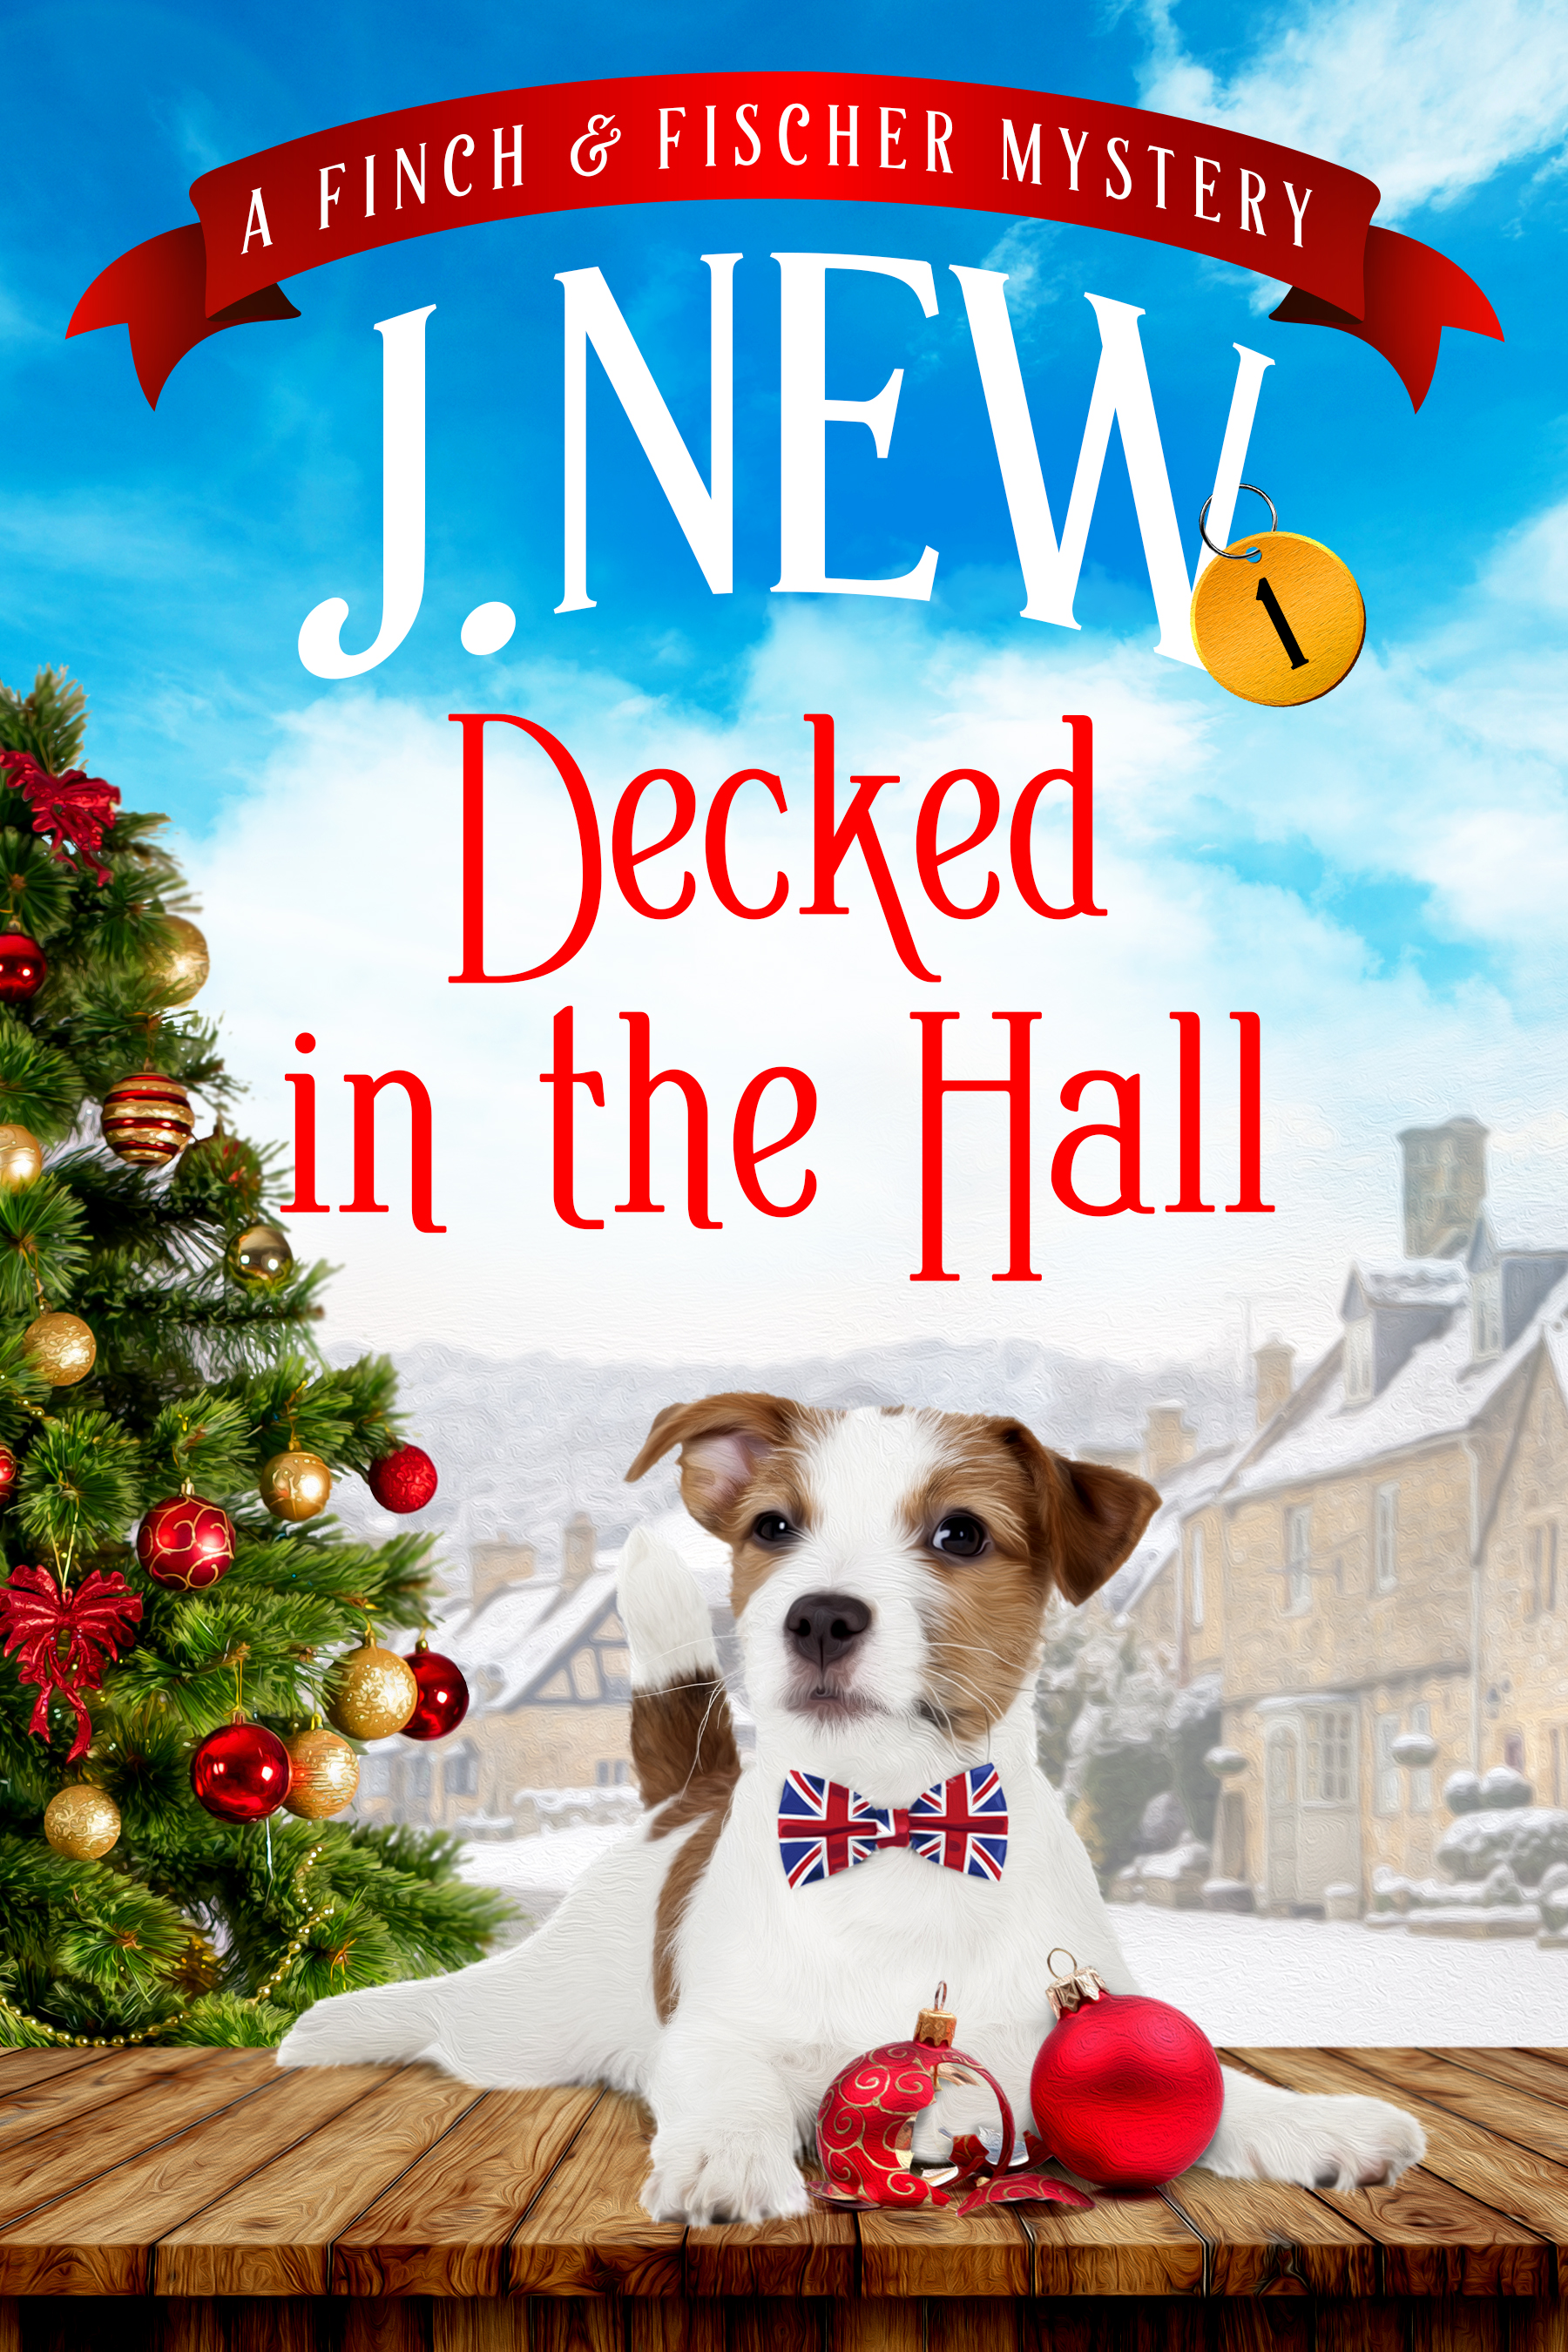 Decked in the Hall book 1 in the popular British cozy mystery series by British author J. New